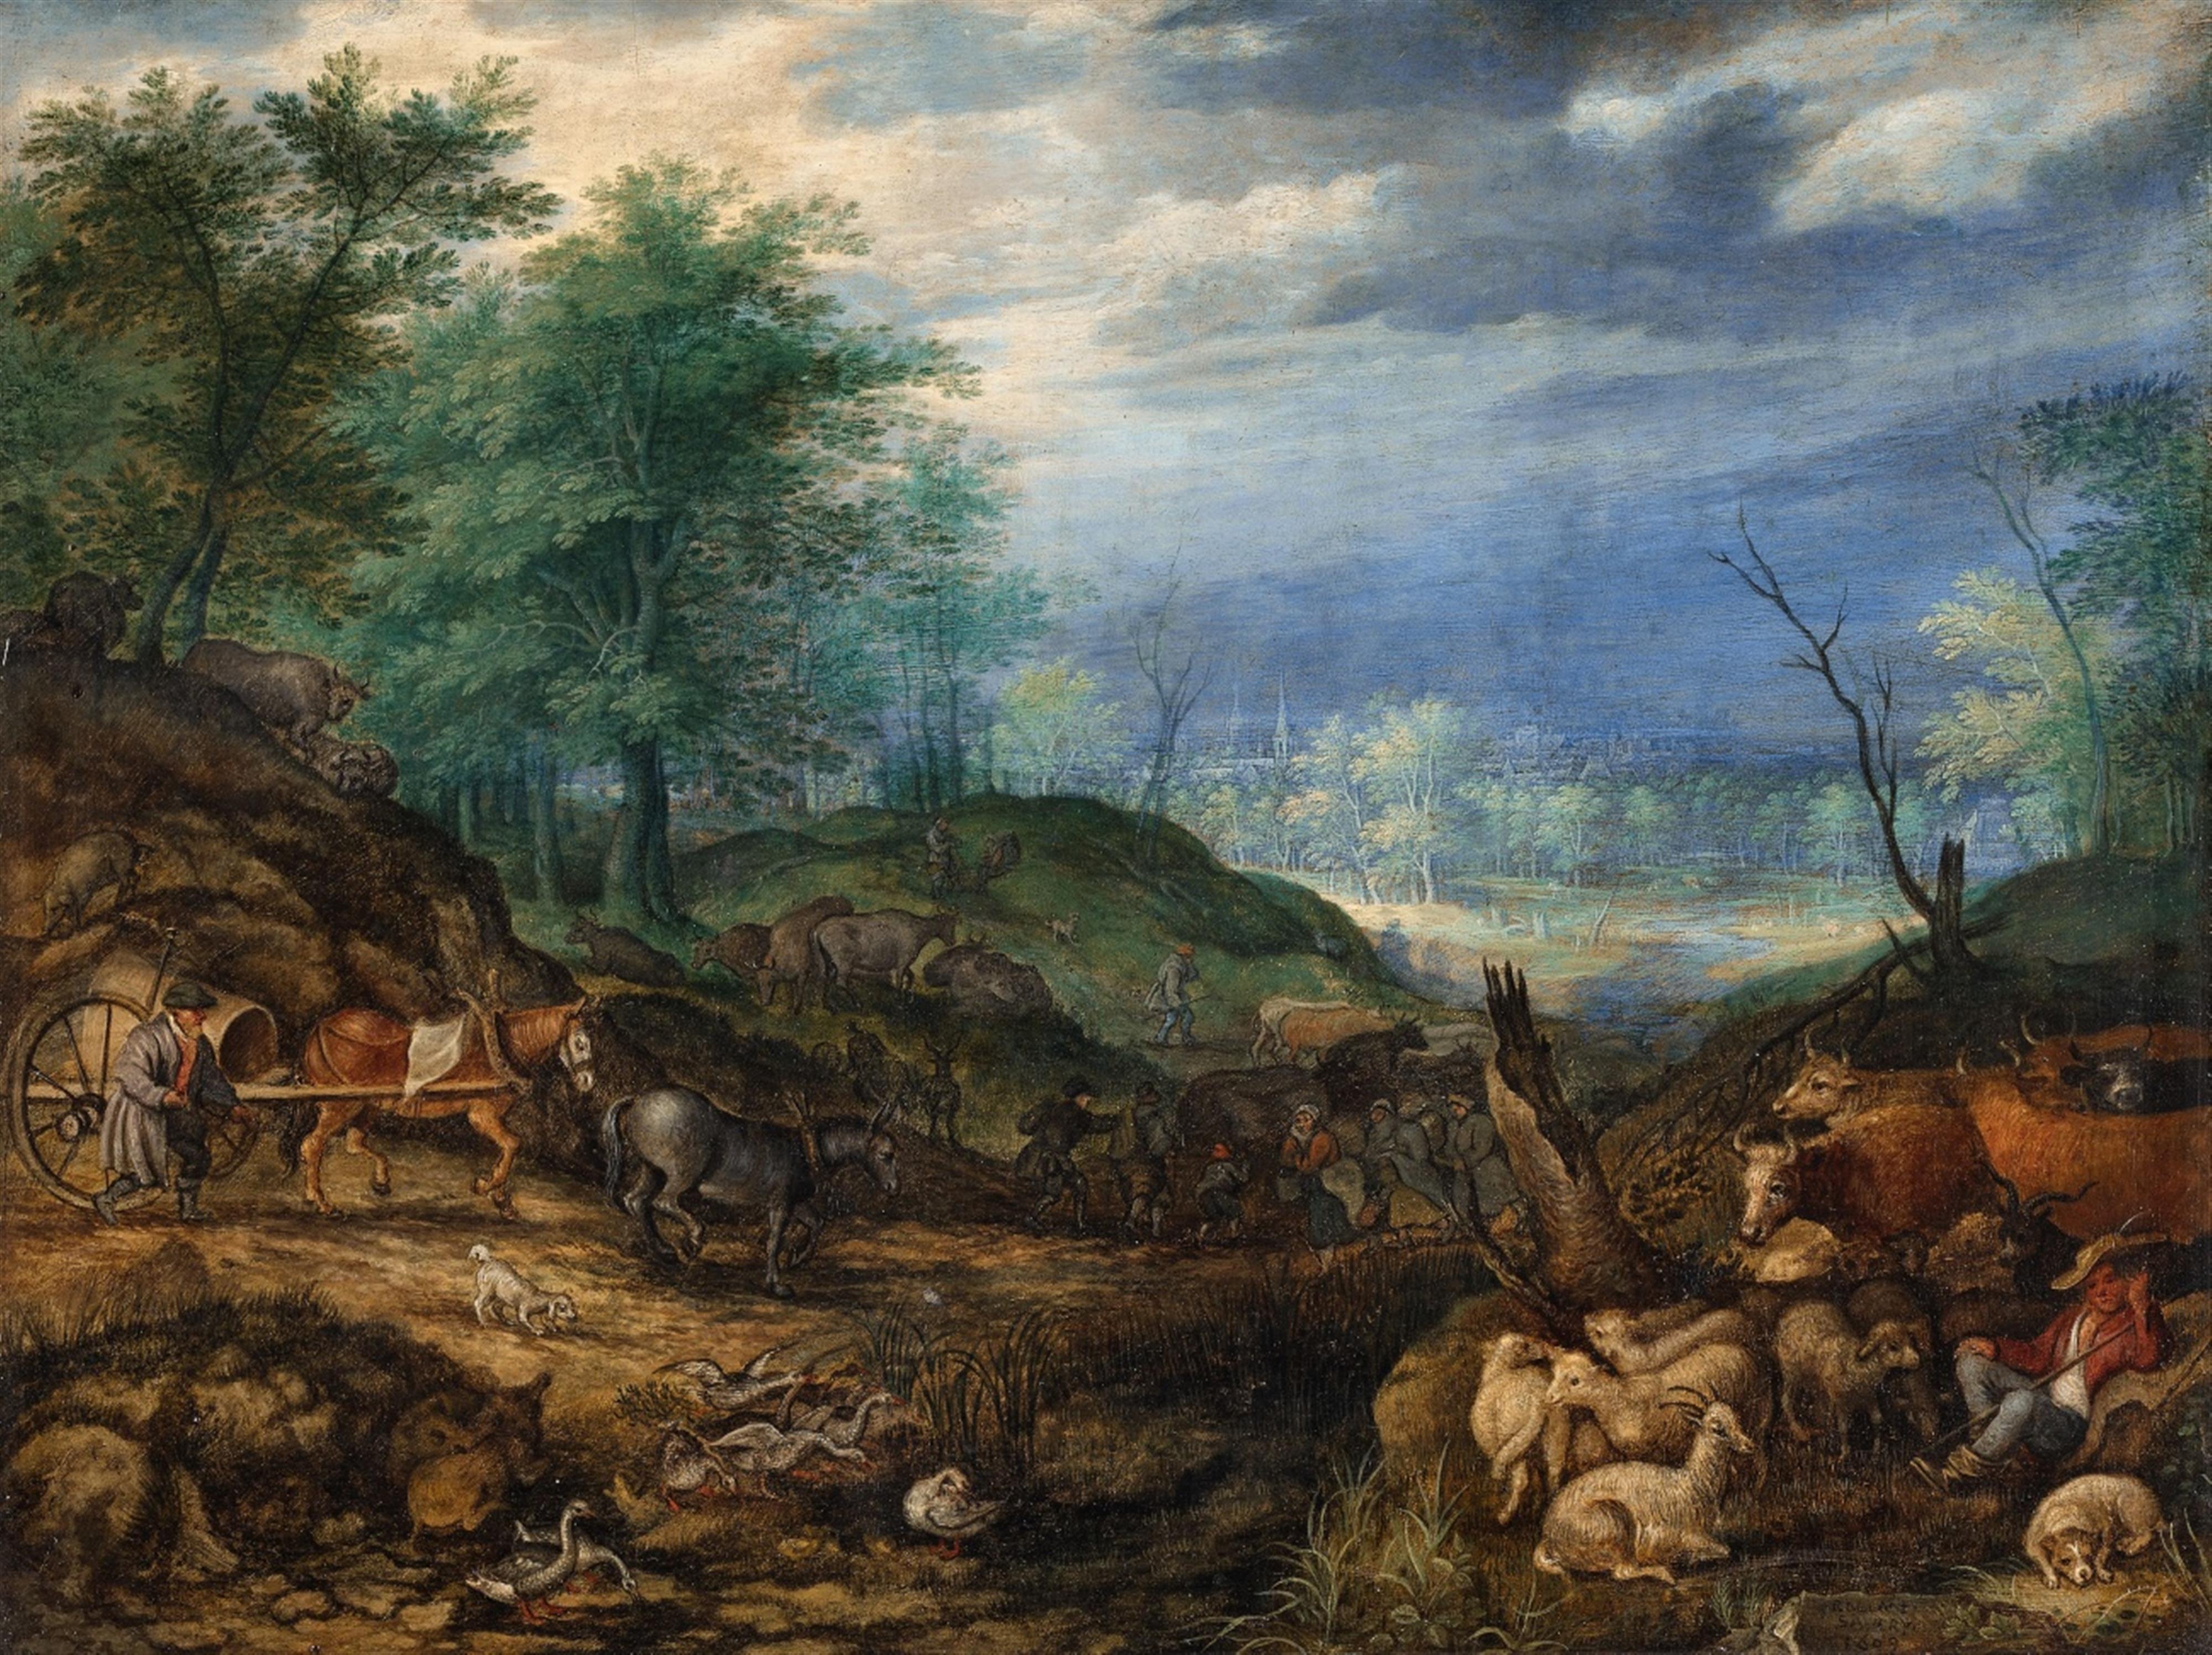 Roelant Savery - Landscape with Shepherds and a Wagon - image-1